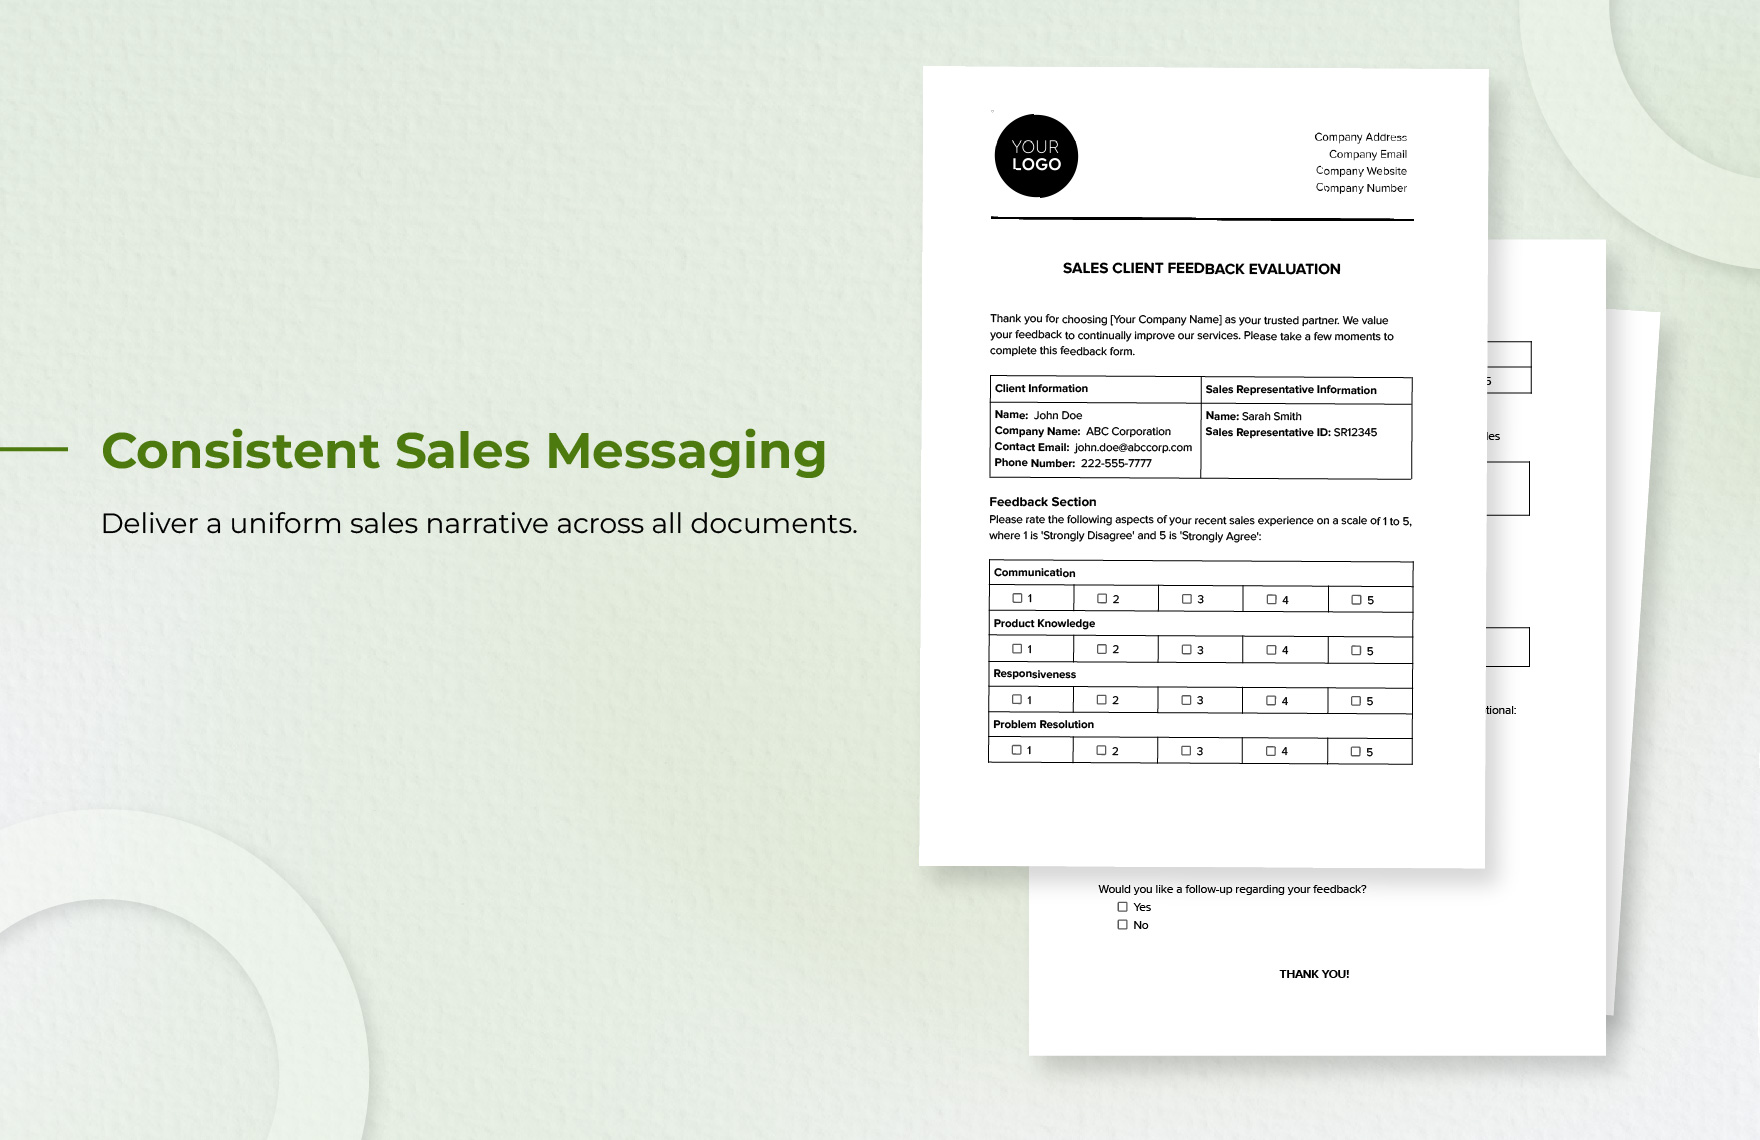 Sales Client Feedback Evaluation Template